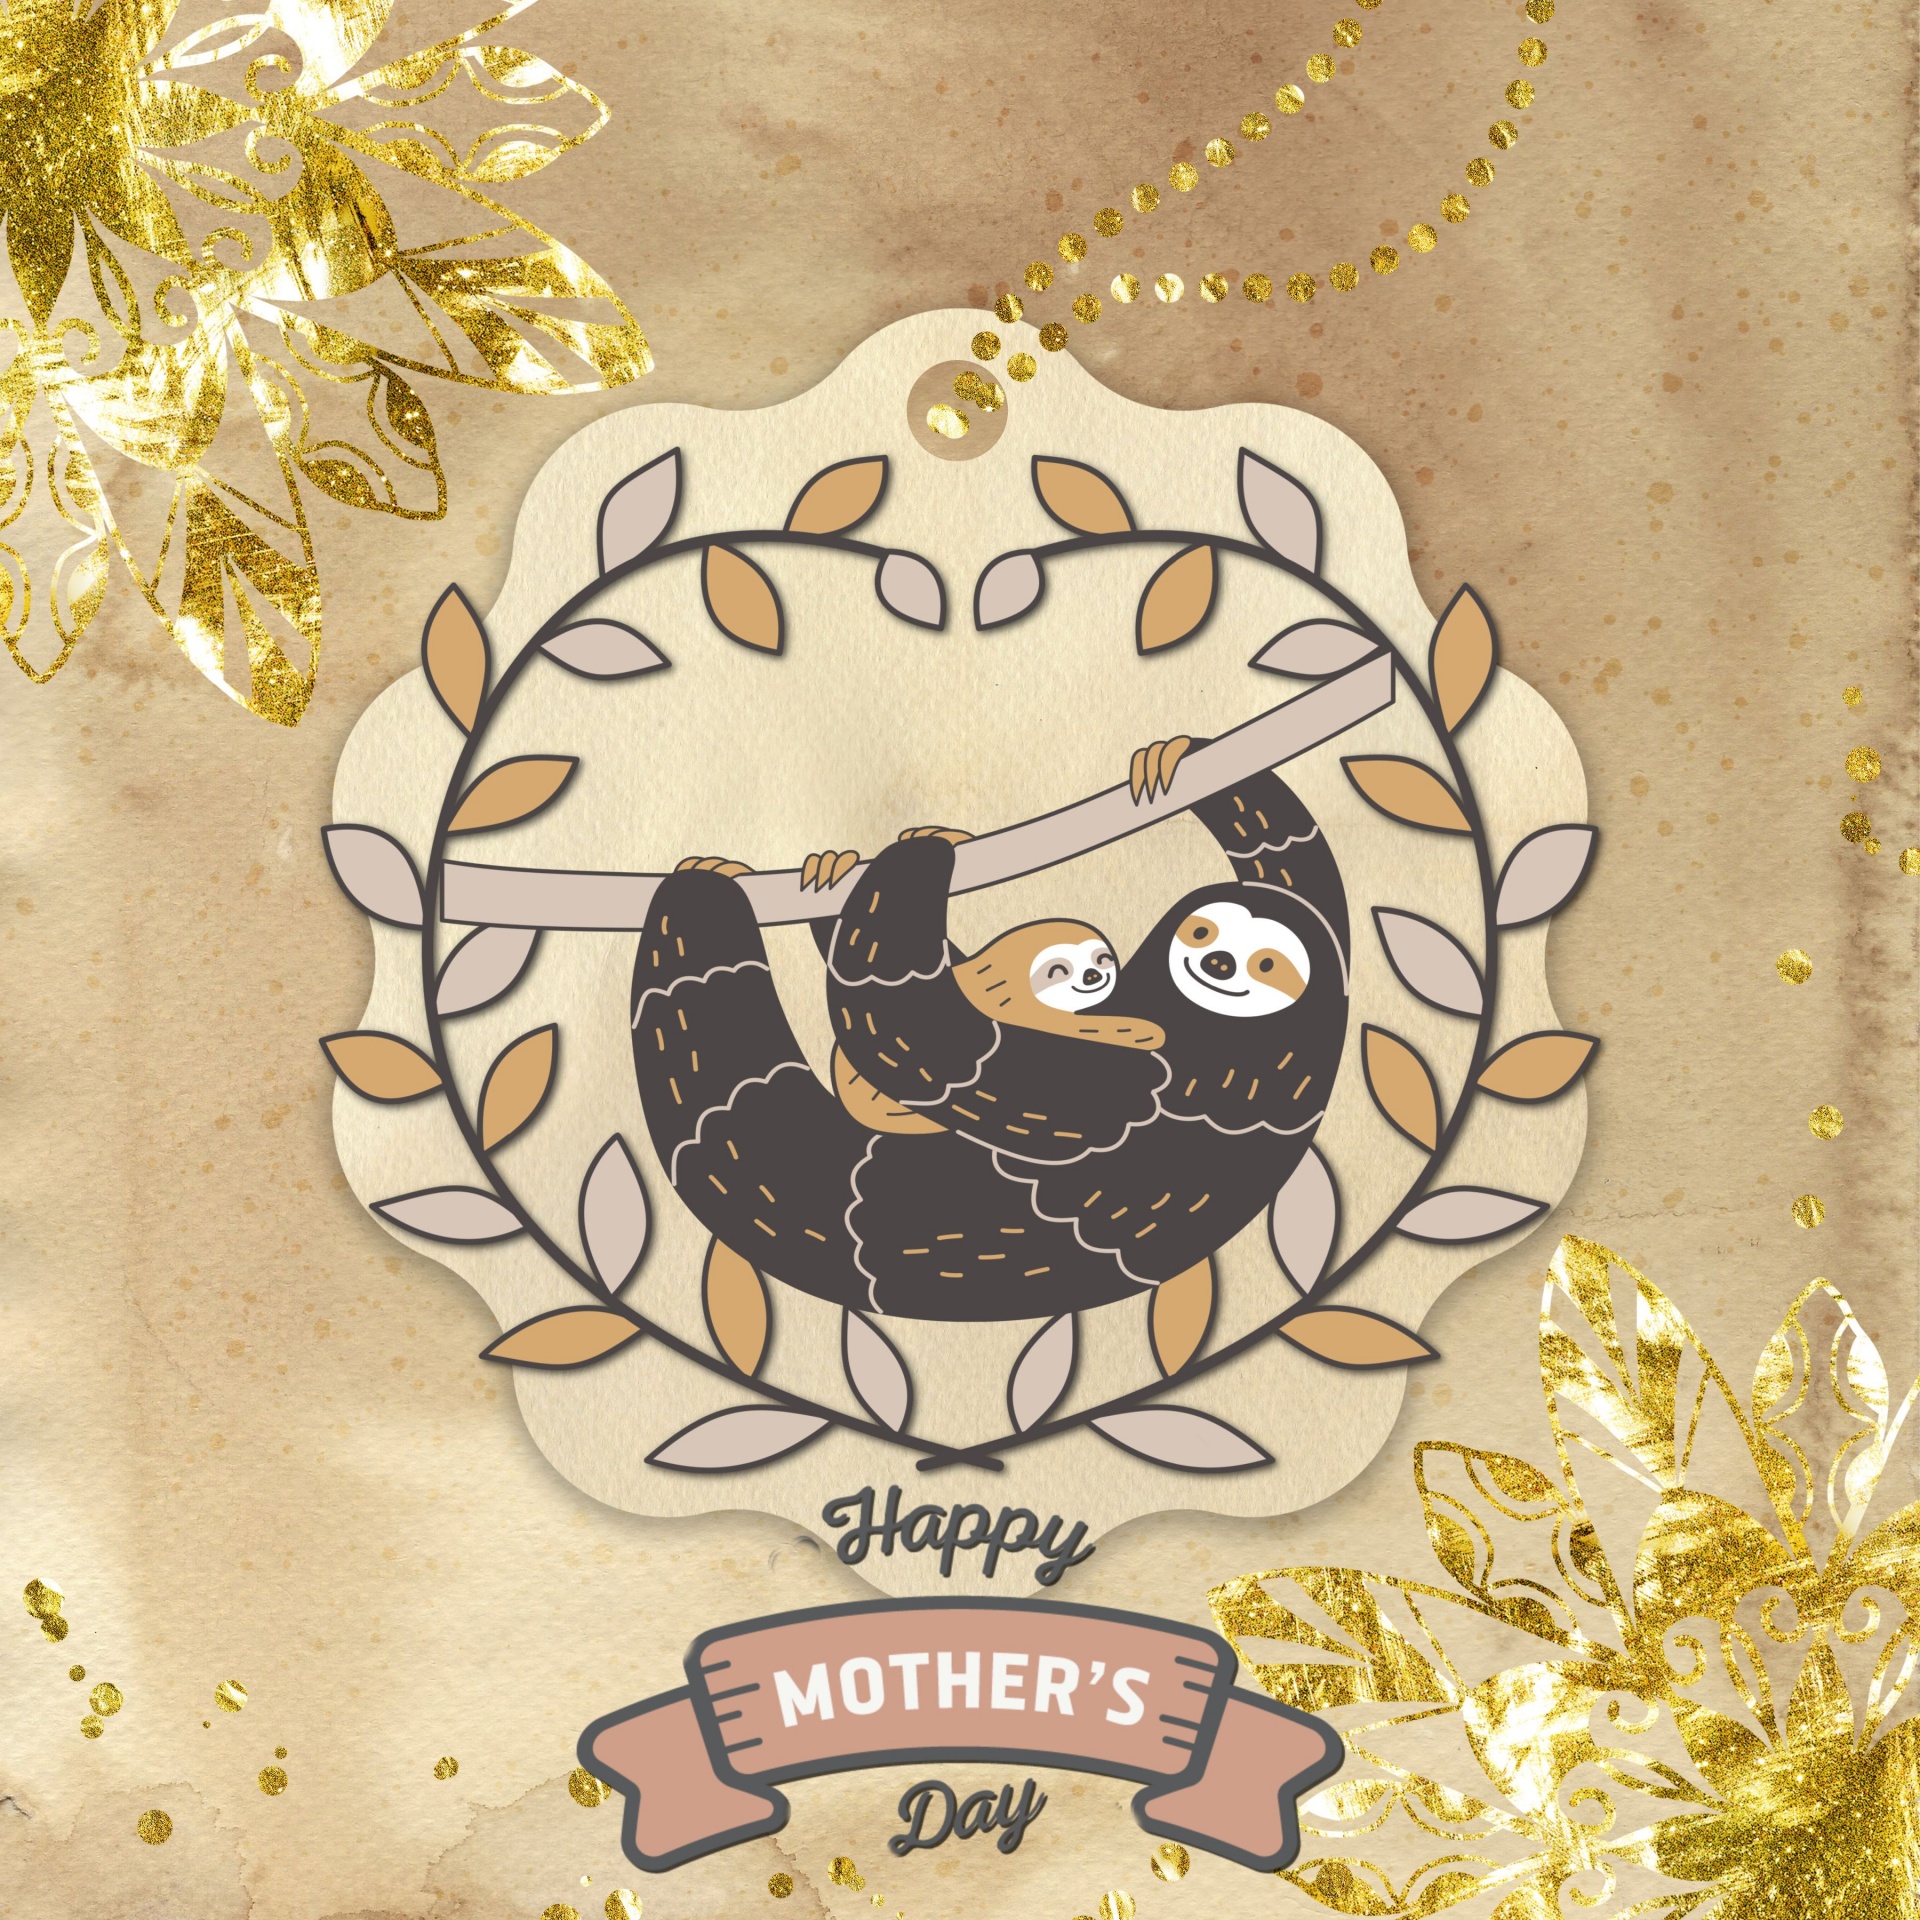 vintage textured background with gold flower overlay and a mam sloth with her baby illustration framed by a simple wreath of leaves